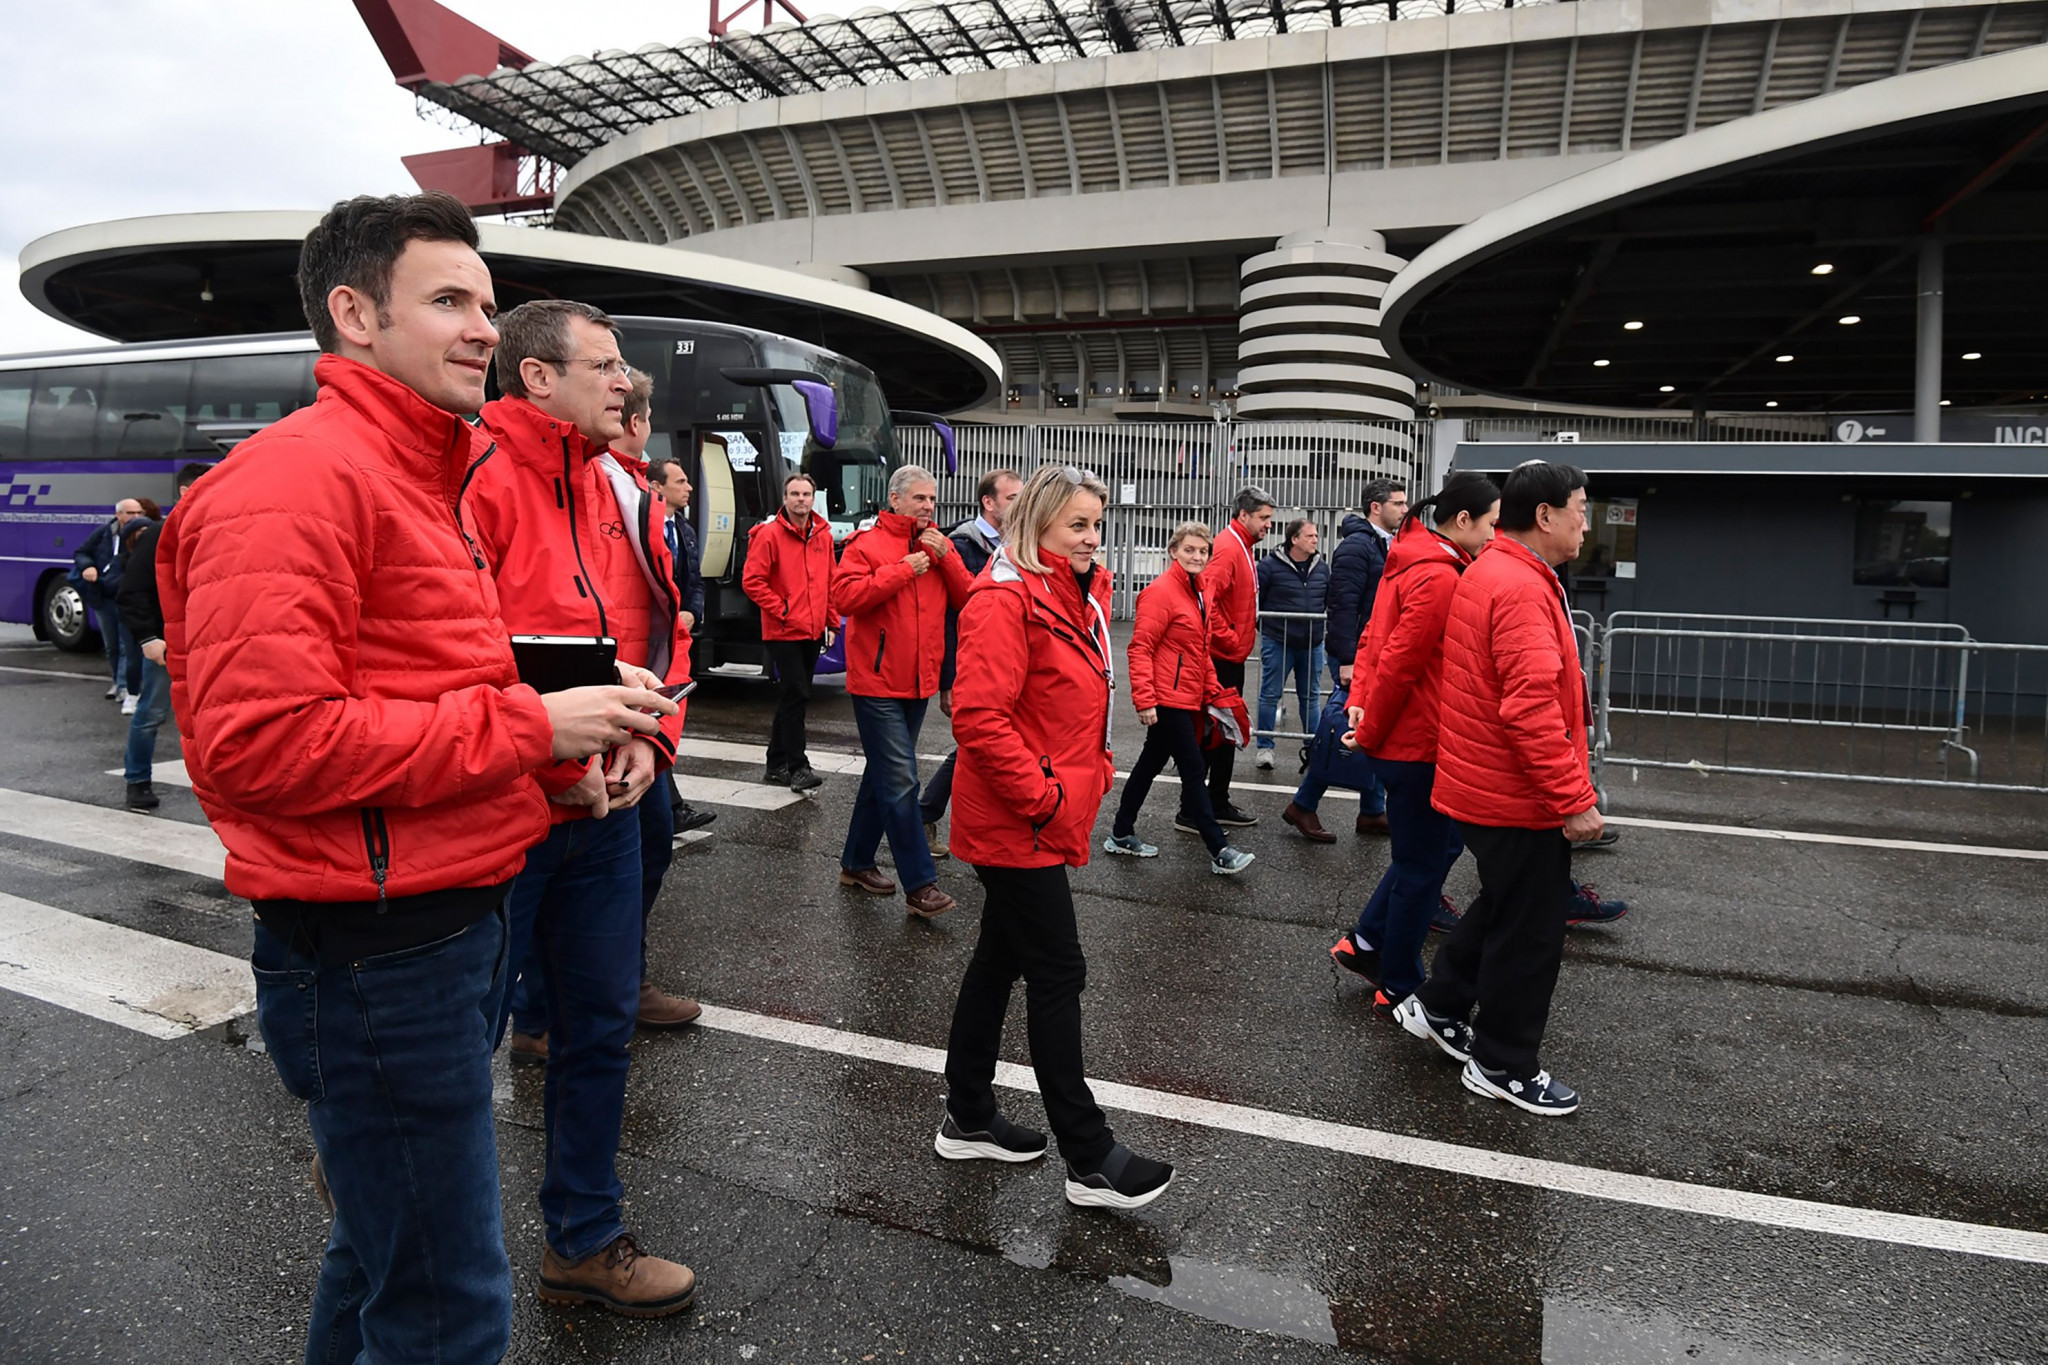 Members of the International Olympic Committee's Evaluation Commission visited the famous San Siro stadium shared by the city's two famous football clubs in Milan in April during an inspection visit ©Getty Images